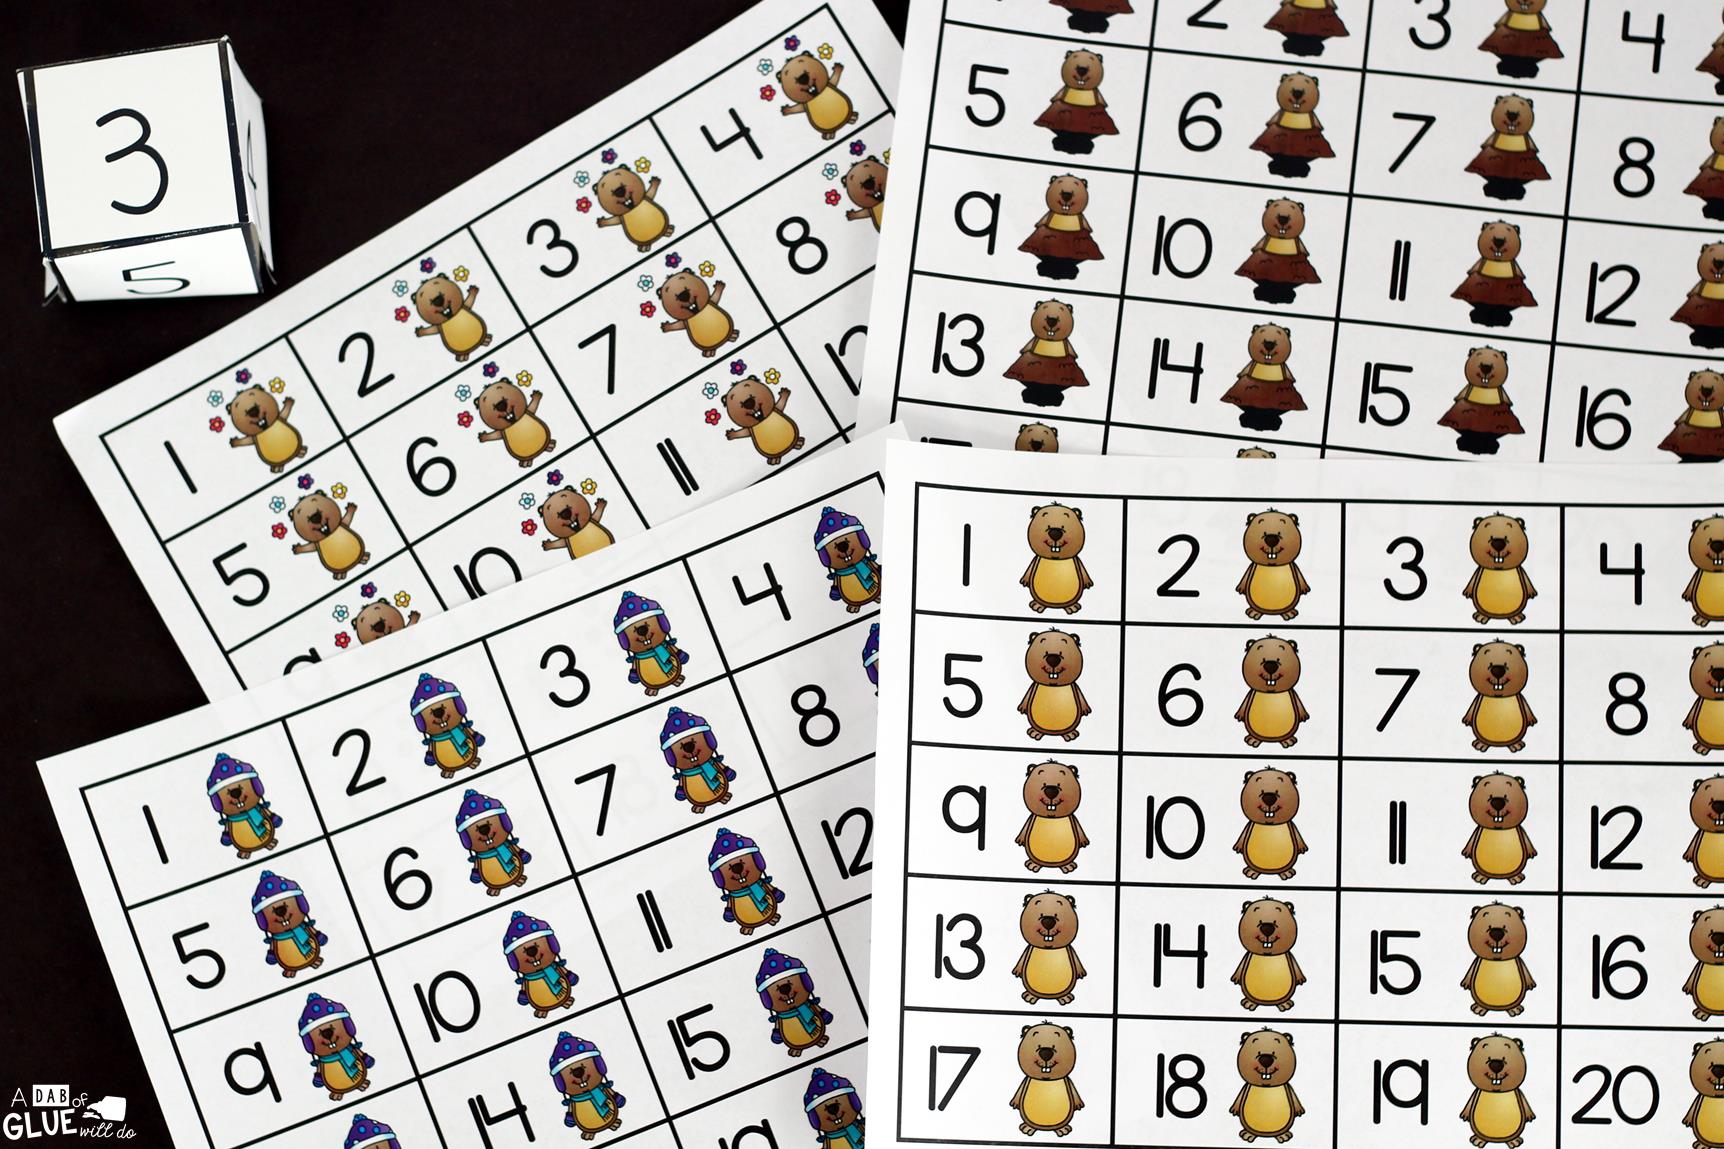 Groundhog First to Twenty Math Game is the perfect addition to your math centers this February. This free printable is great for preschool, kindergarten, and first grade students. 